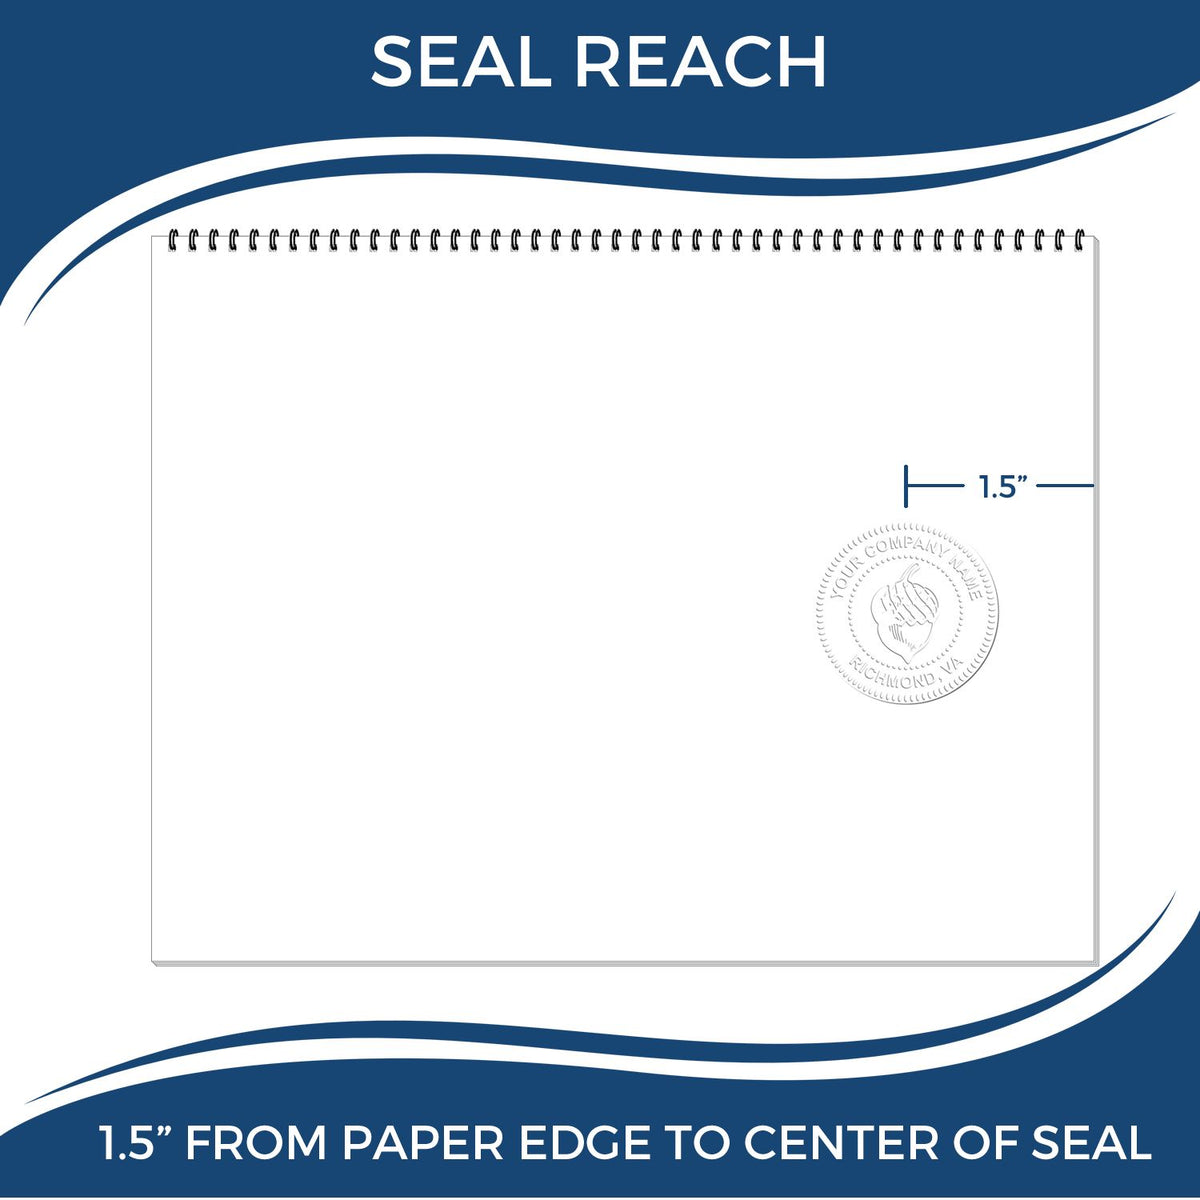 An infographic showing the seal reach which is represented by a ruler and a miniature seal image of the Handheld Minnesota Land Surveyor Seal